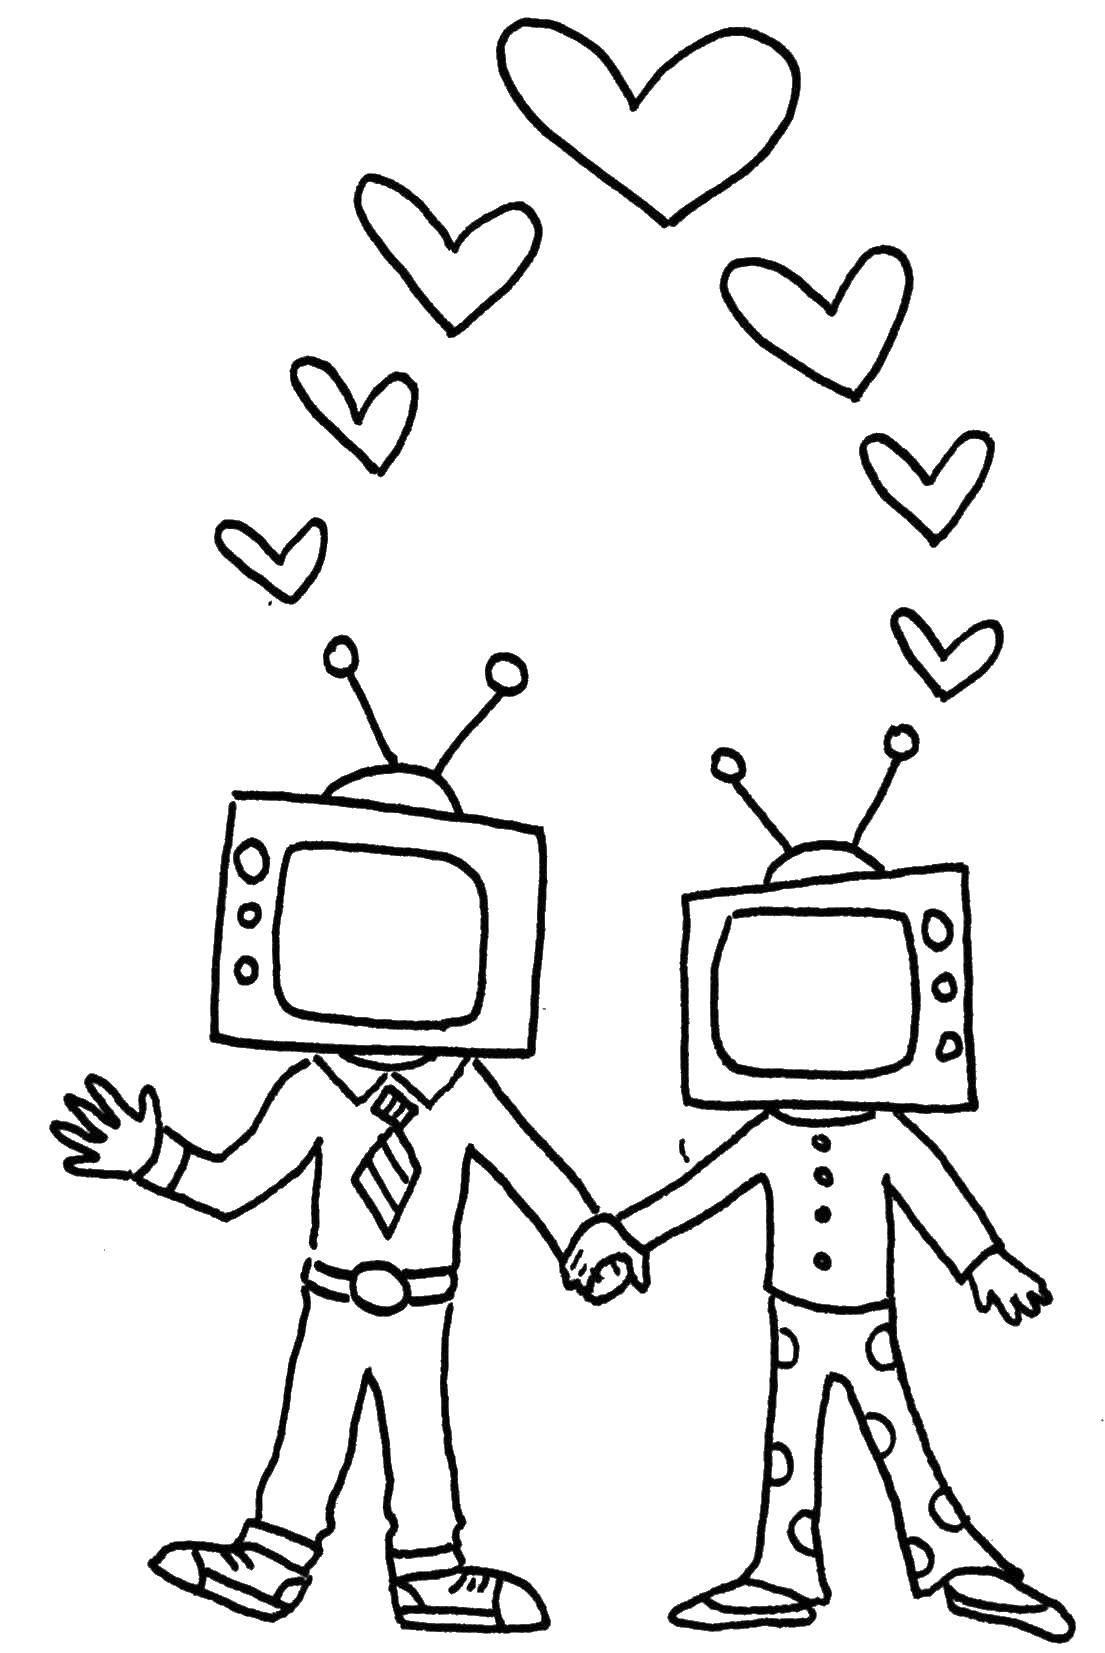 Coloring Lovers TV. Category I love you. Tags:  love, TV, .